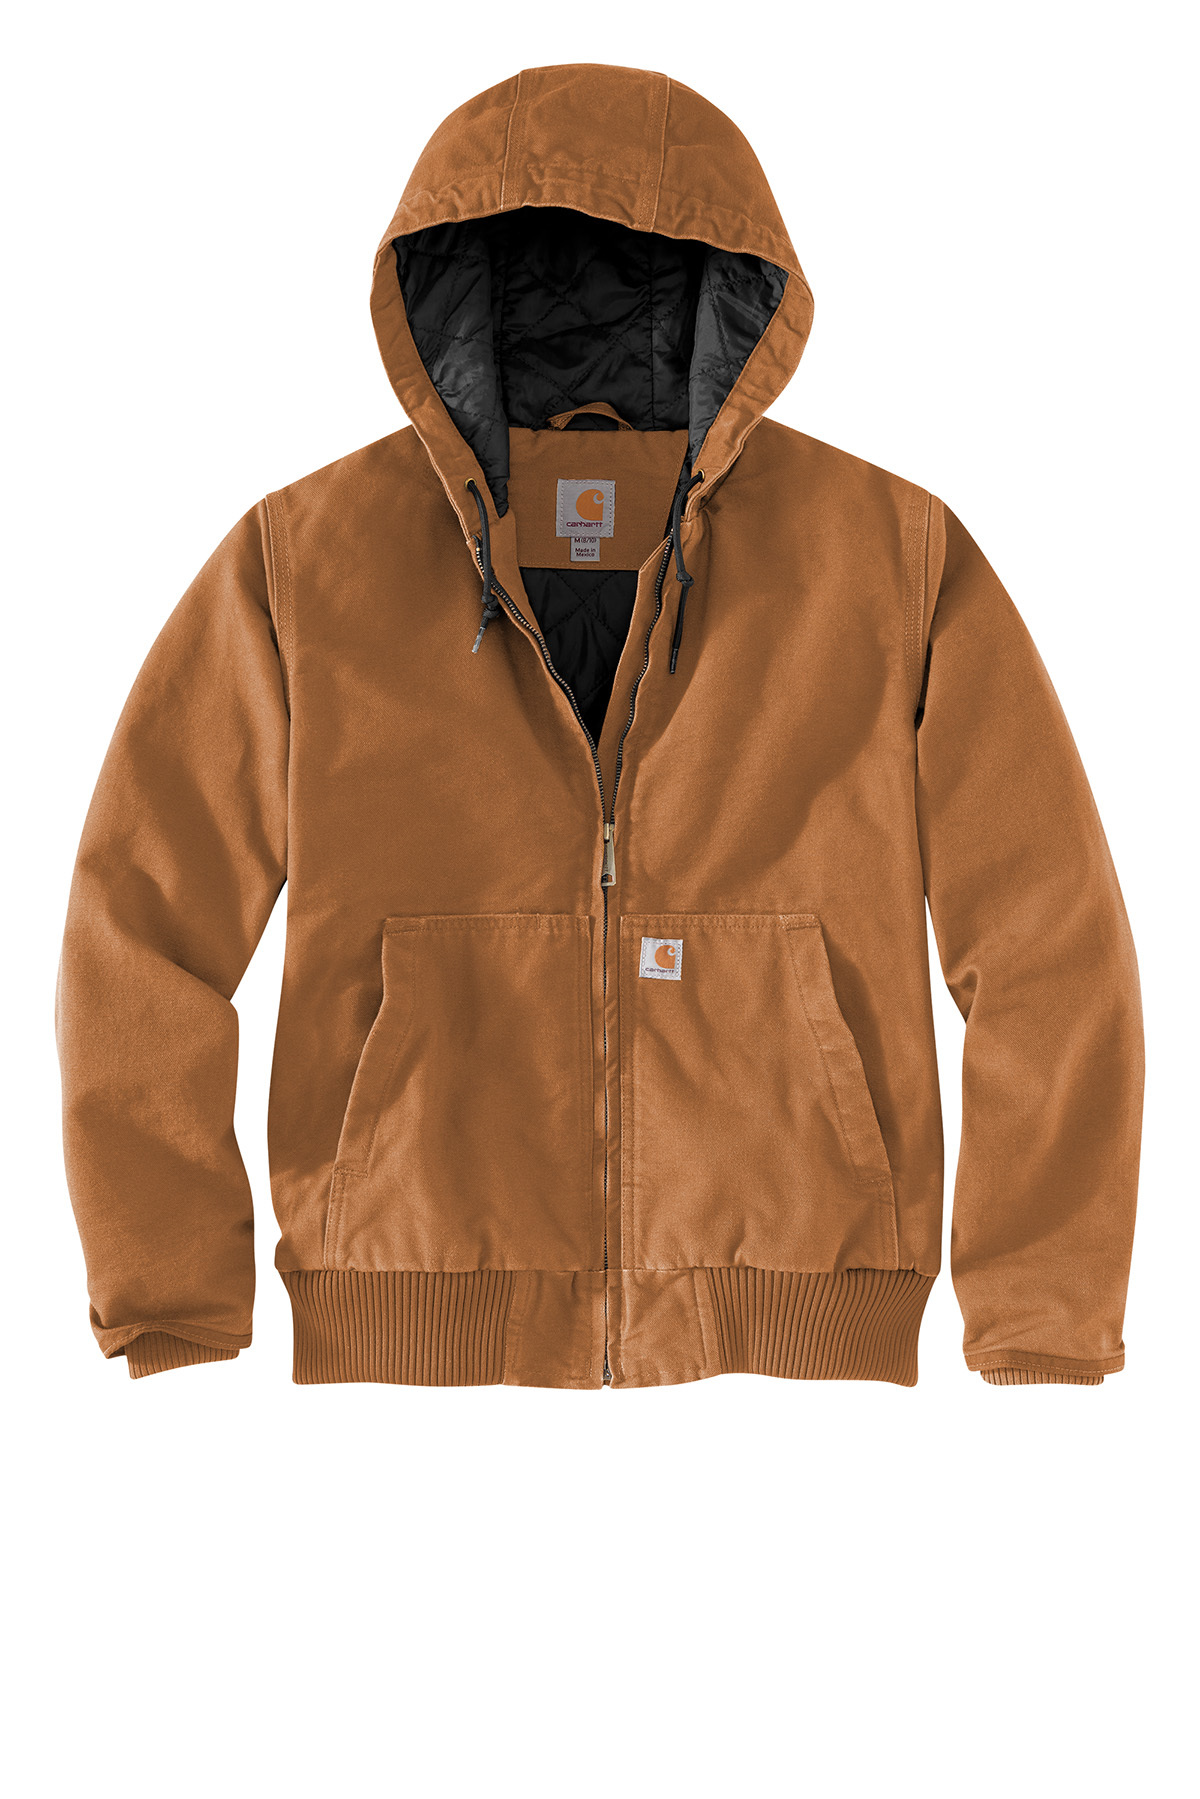 Carhartt Women’s Washed Duck Active Jac | Product | SanMar